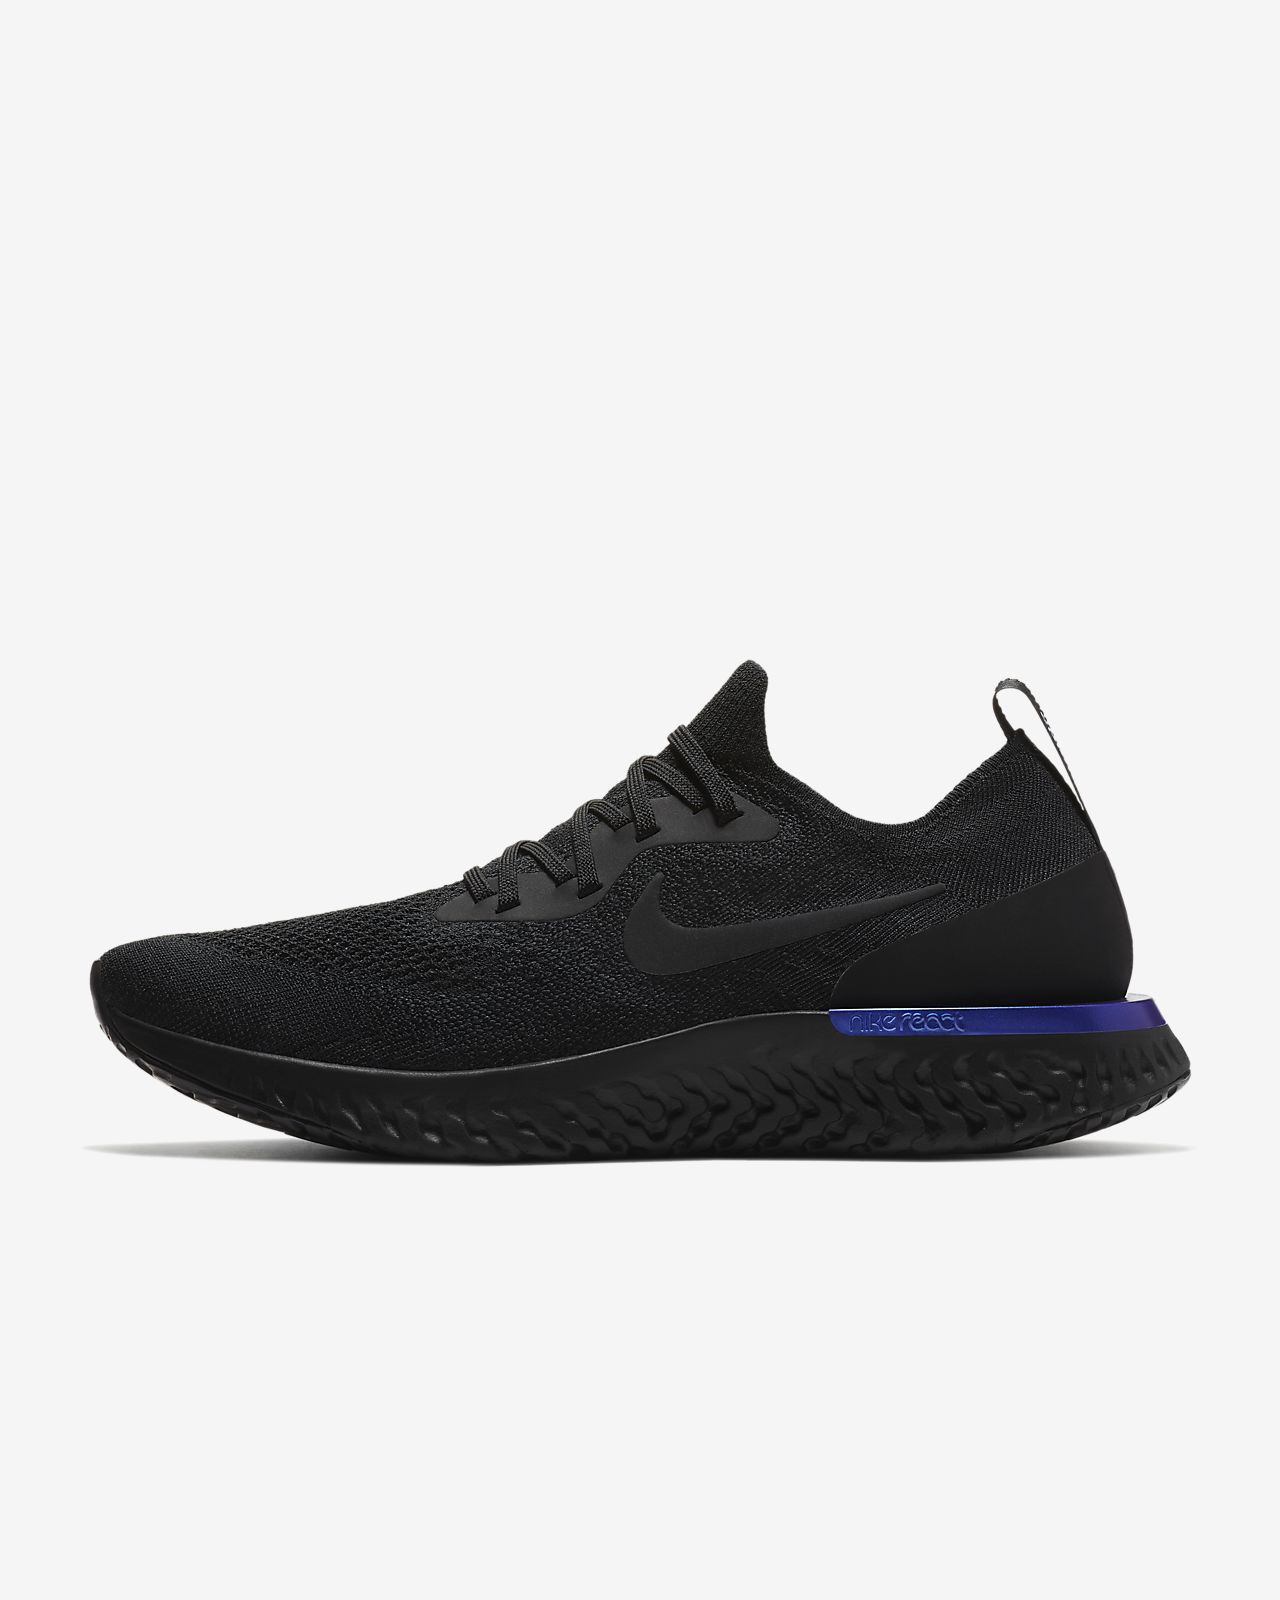 nike epic react flyknit shoes price